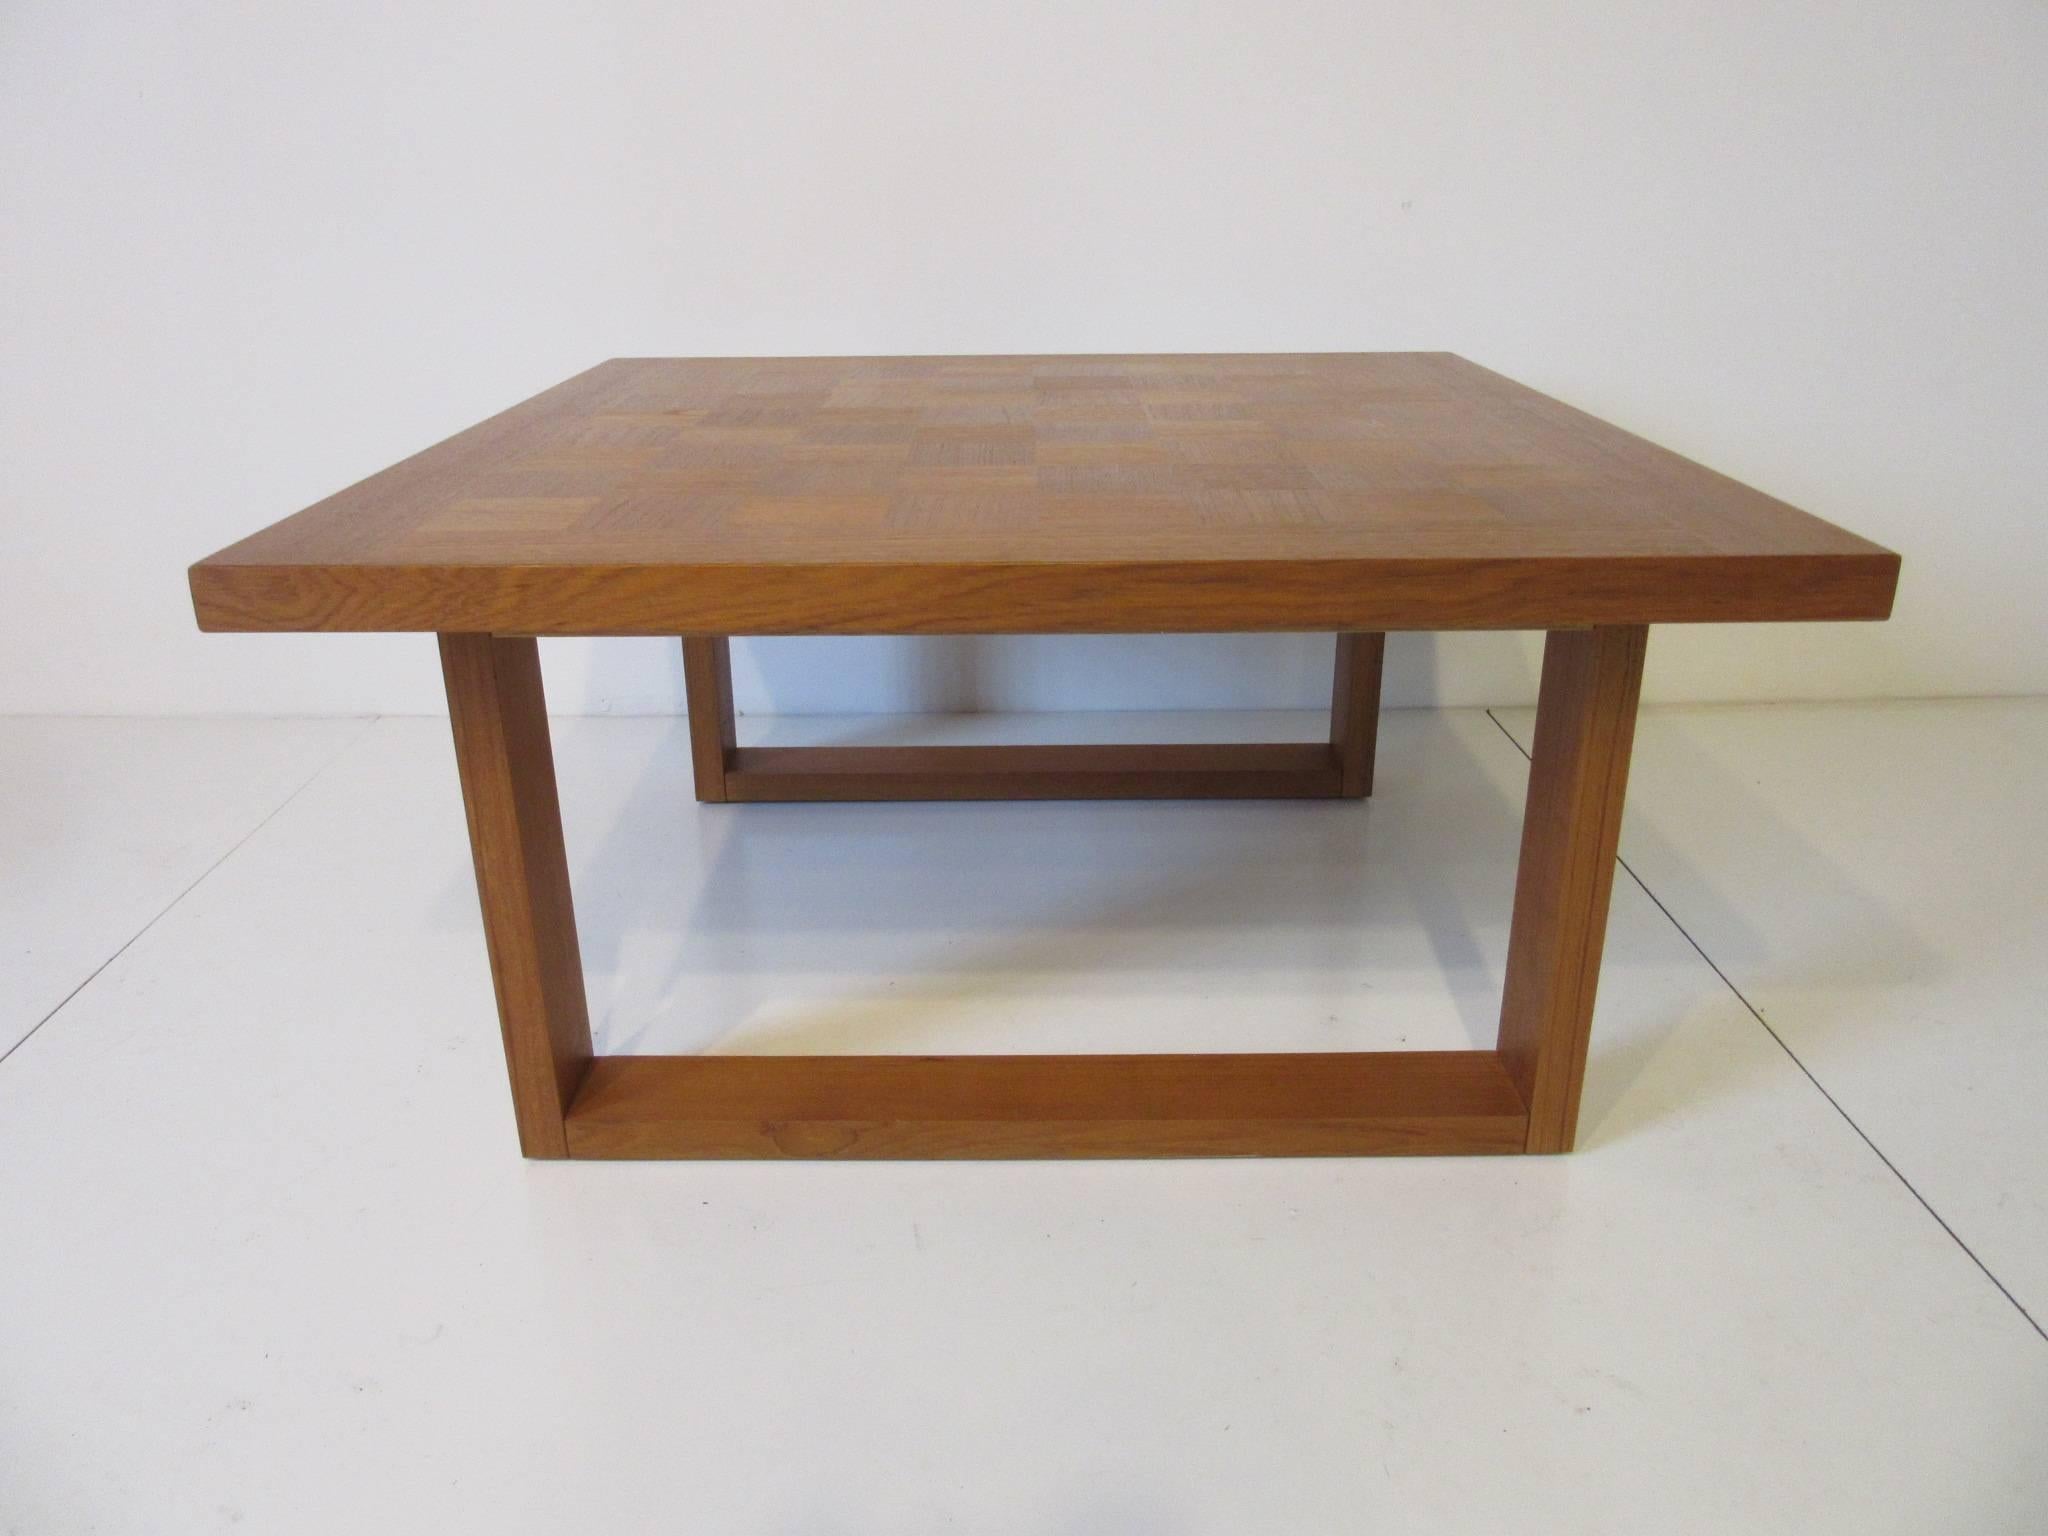 A sled leg teak wood coffee table with checker board styled top manufactured by the Cado Furniture company, Denmark.